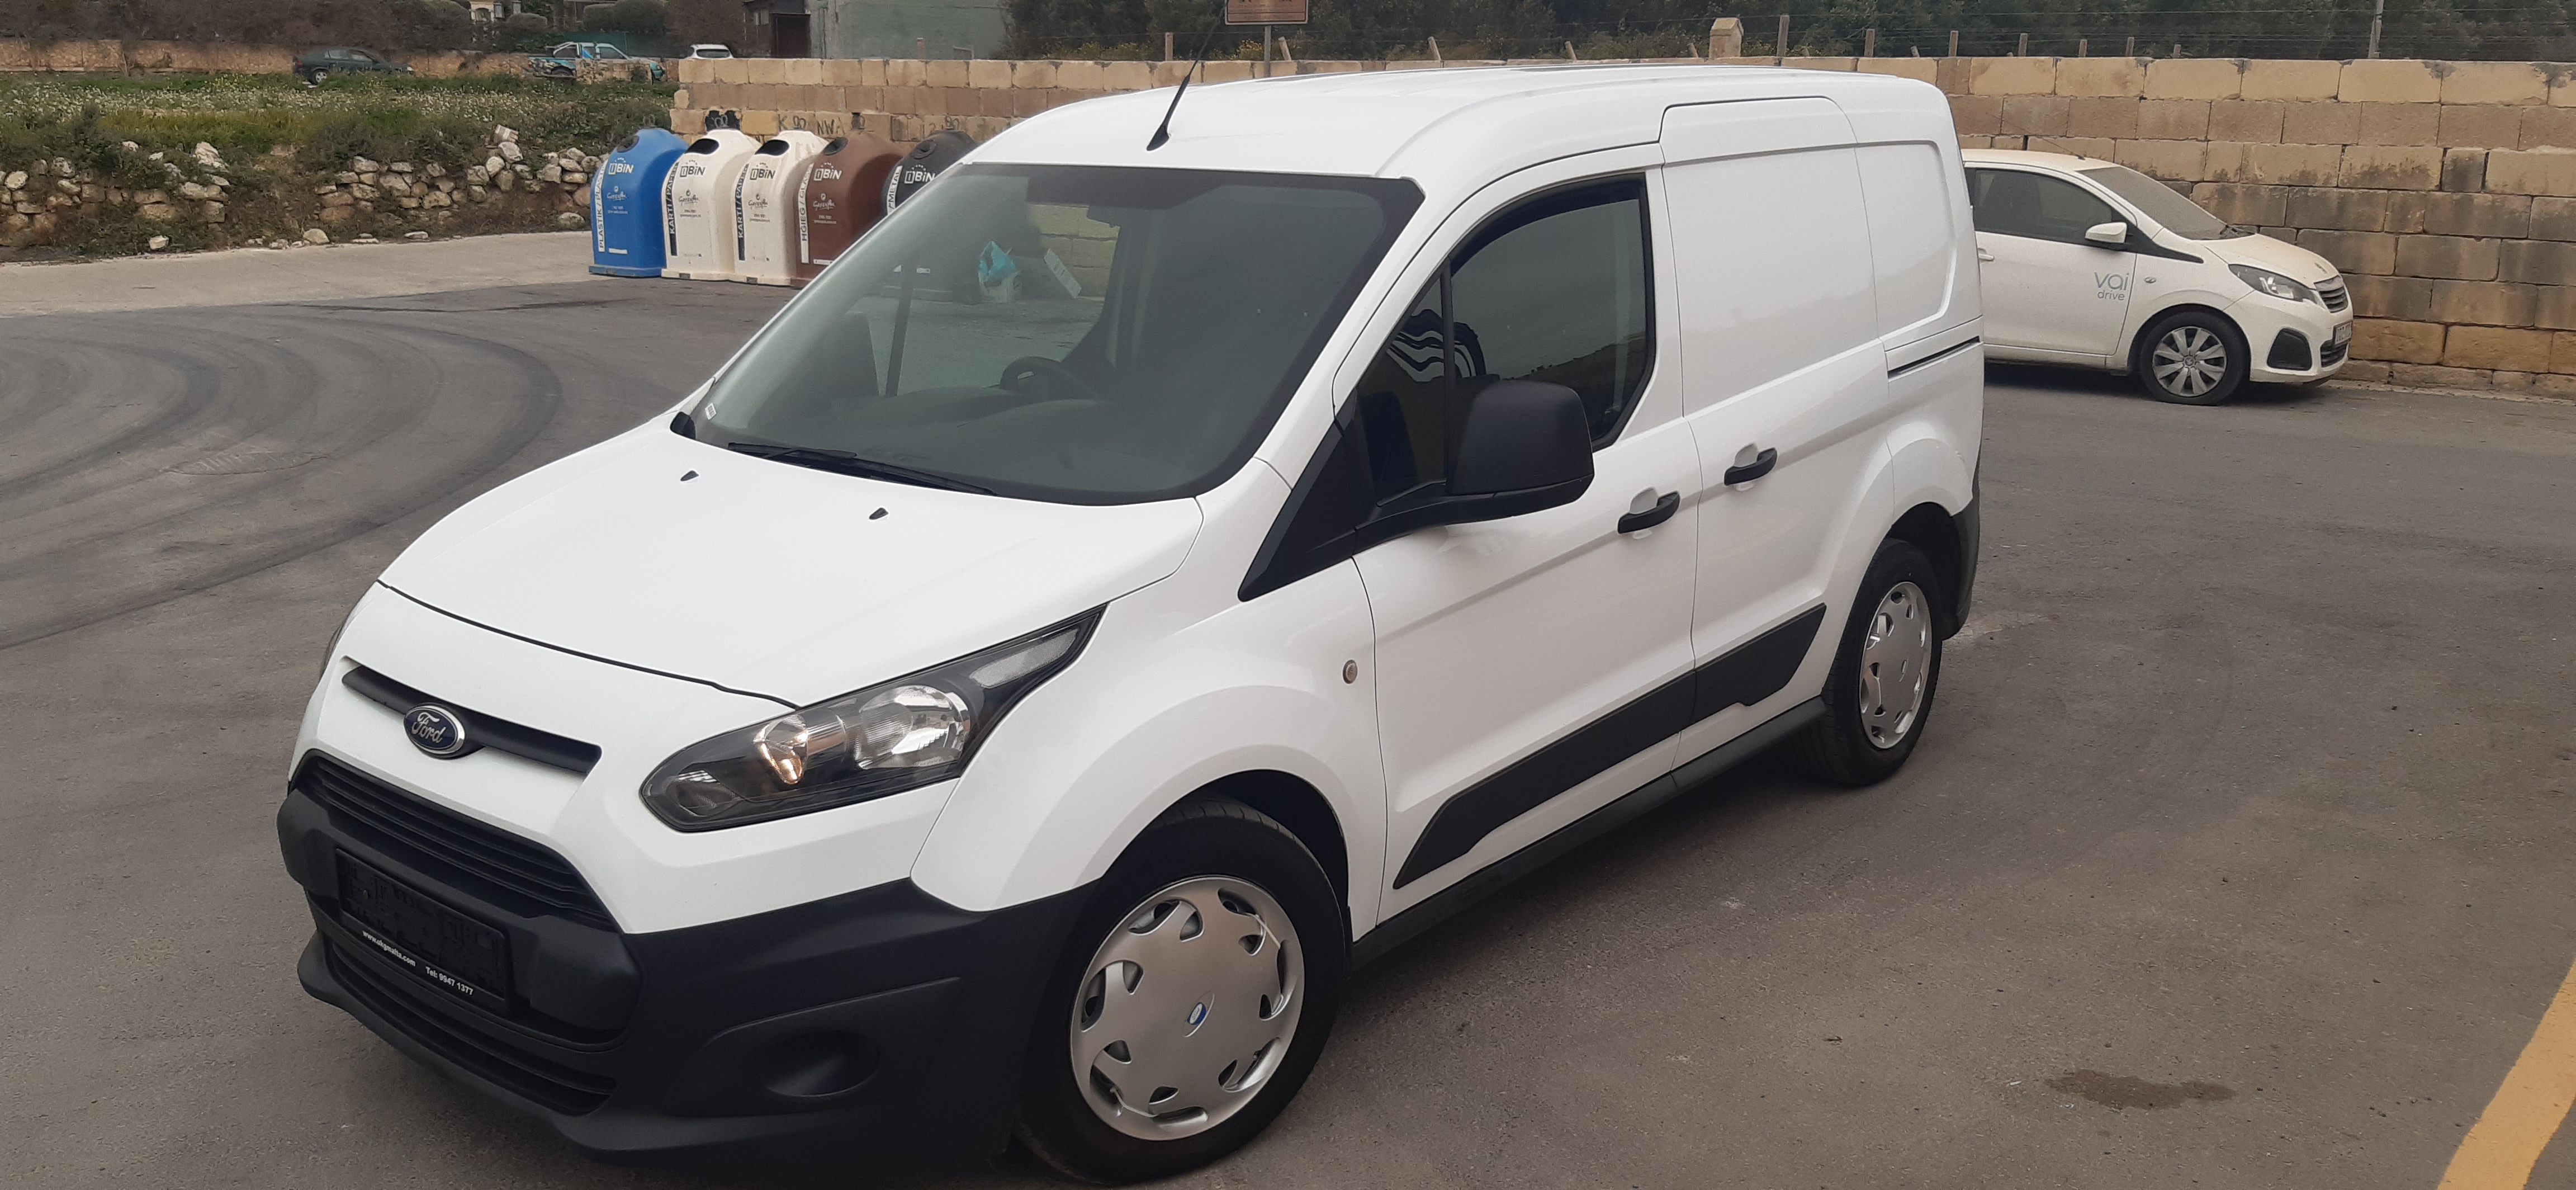 Ford Connect van 220 2016 SOLD